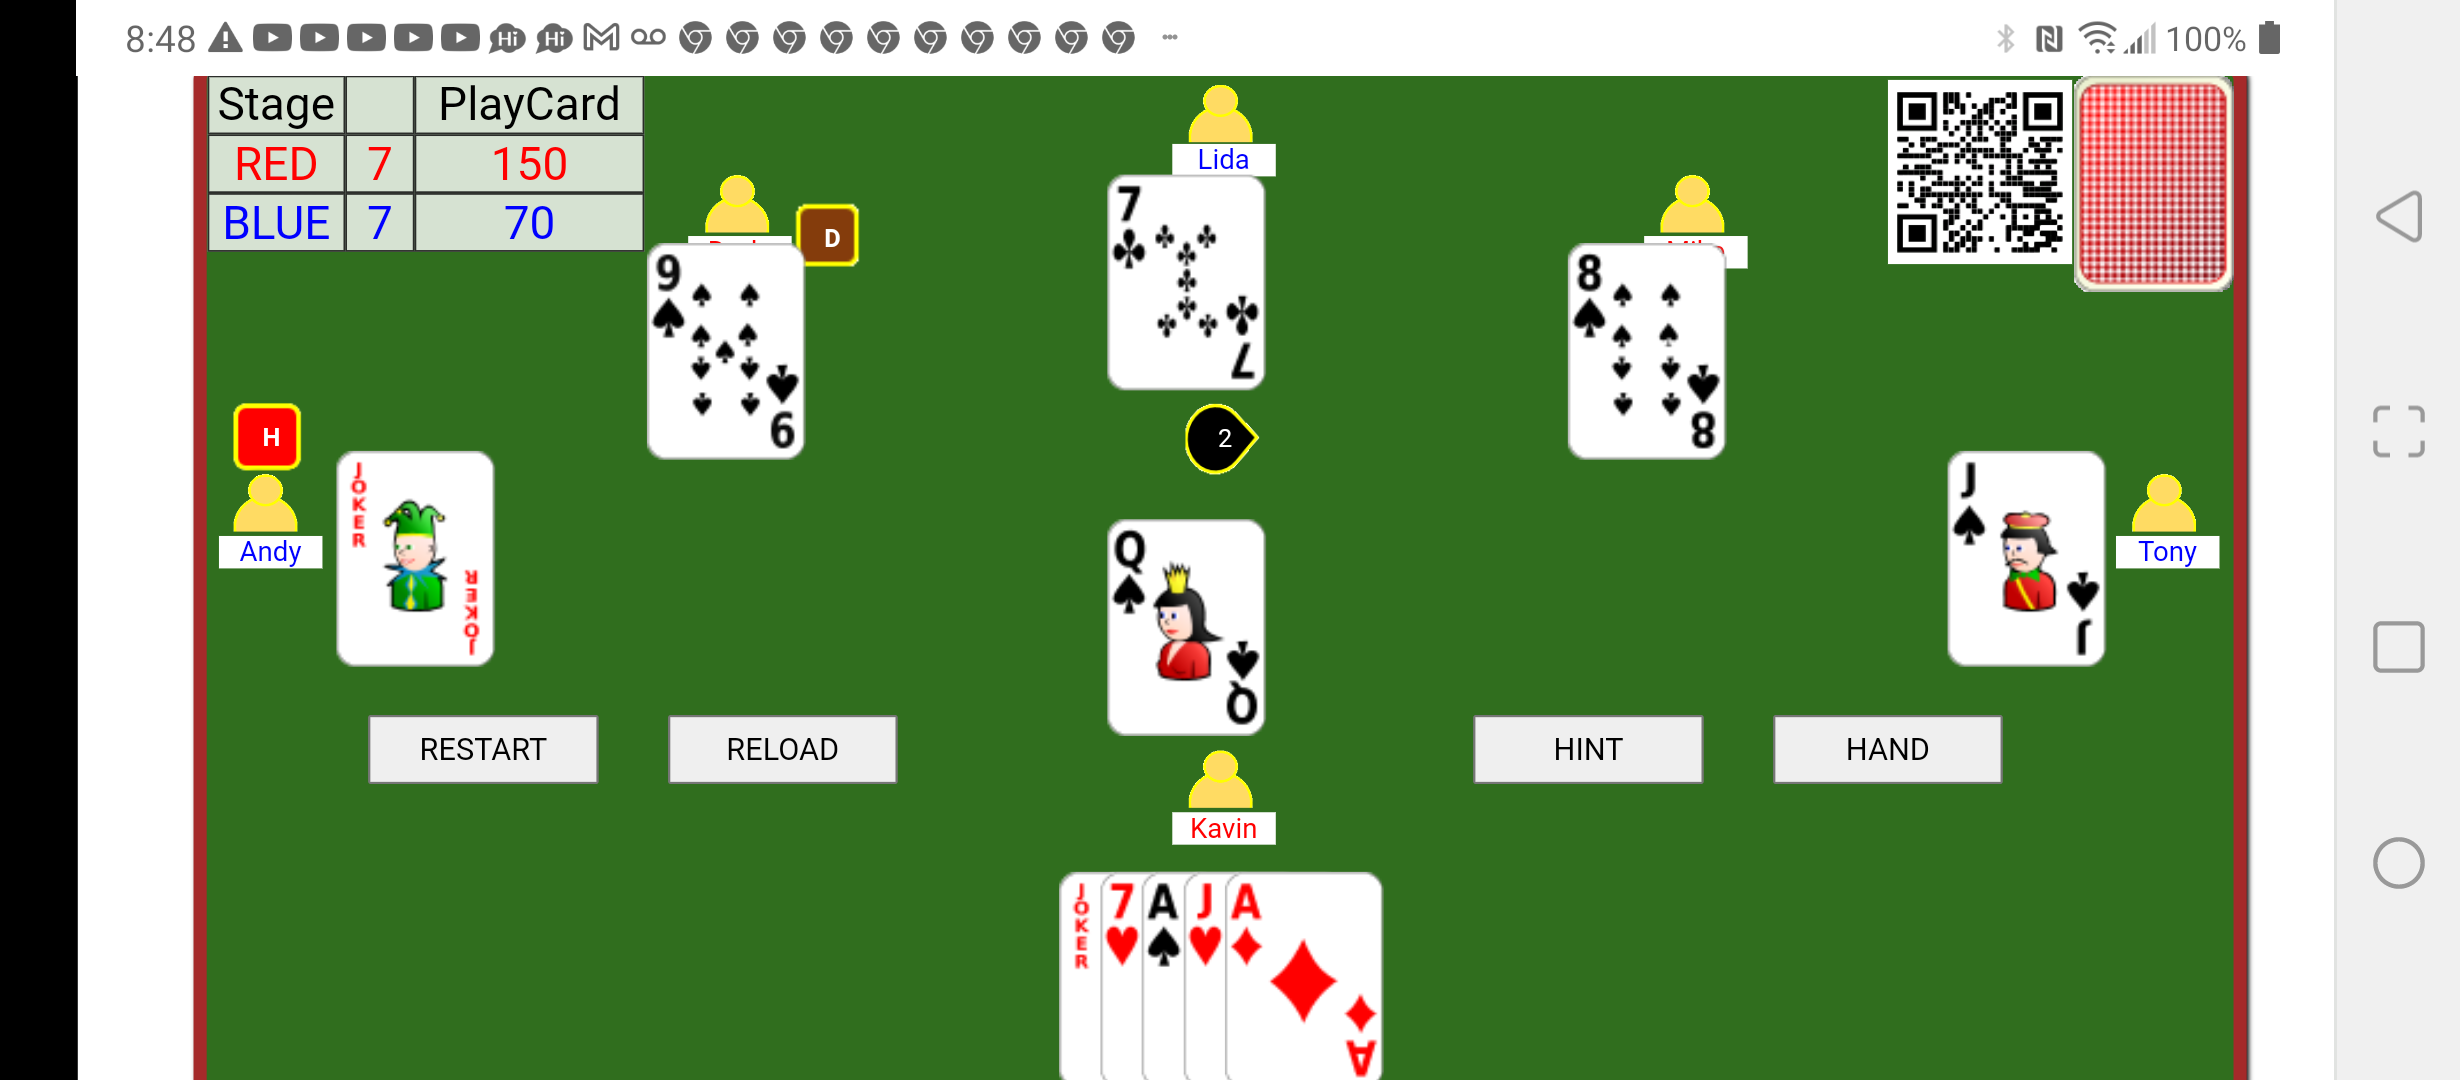 html5 tractor card game Screenshot_20220116-084850.png